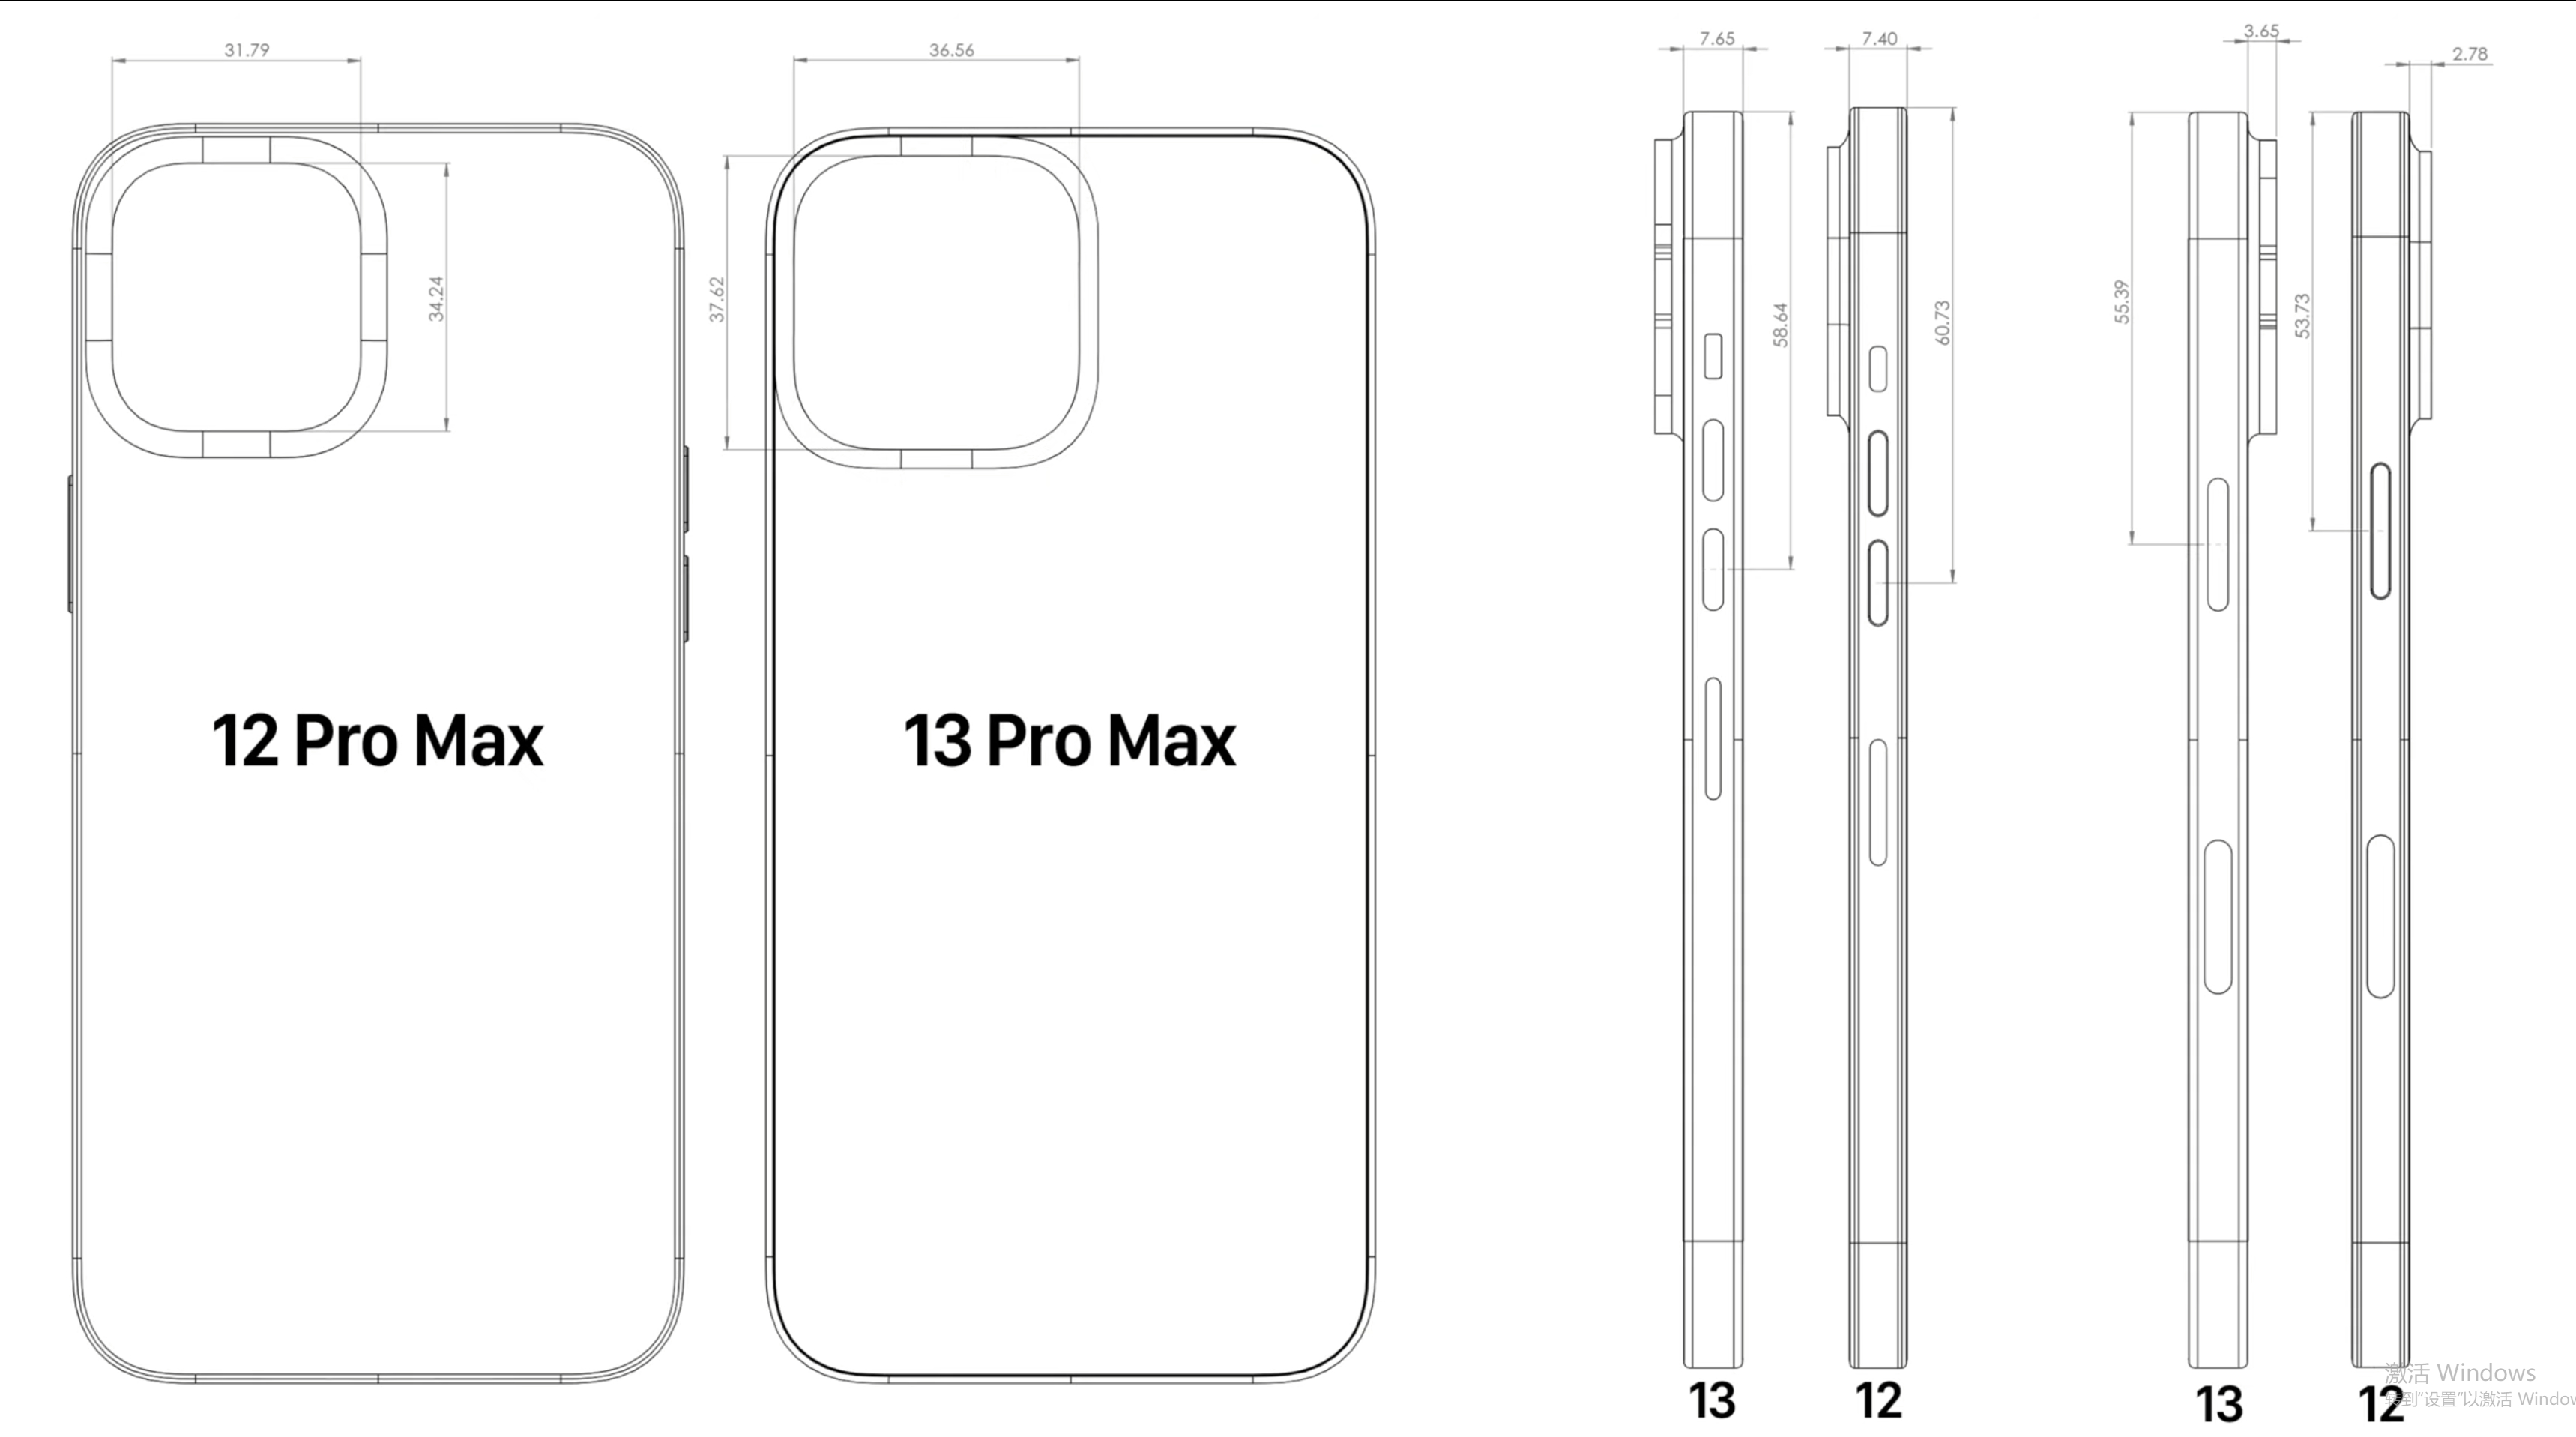 iPhone 13 Pro Max size vs iPhone 12 Pro Max size